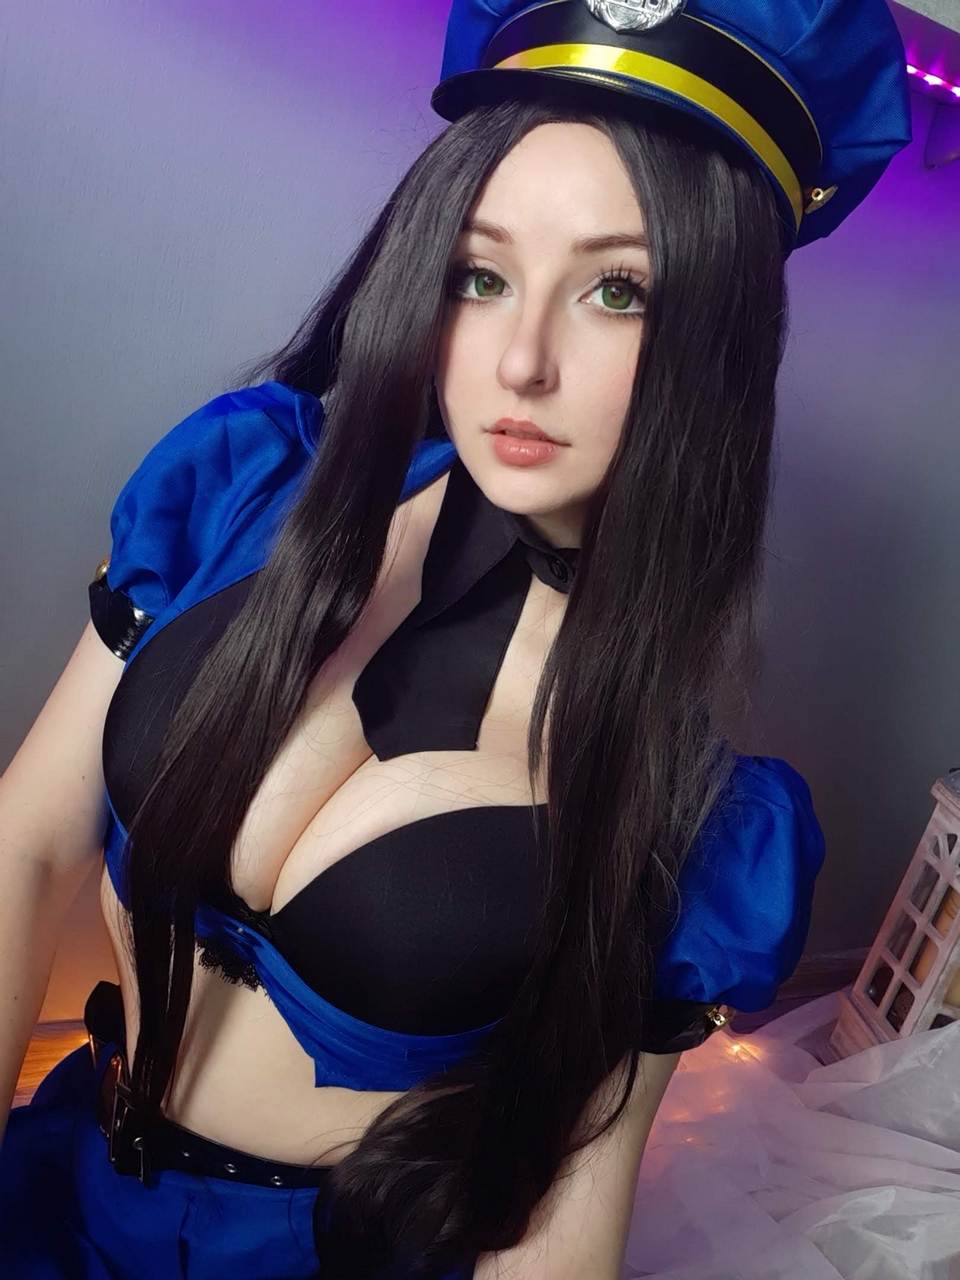 Caitlyn From League Of Legends By Namine